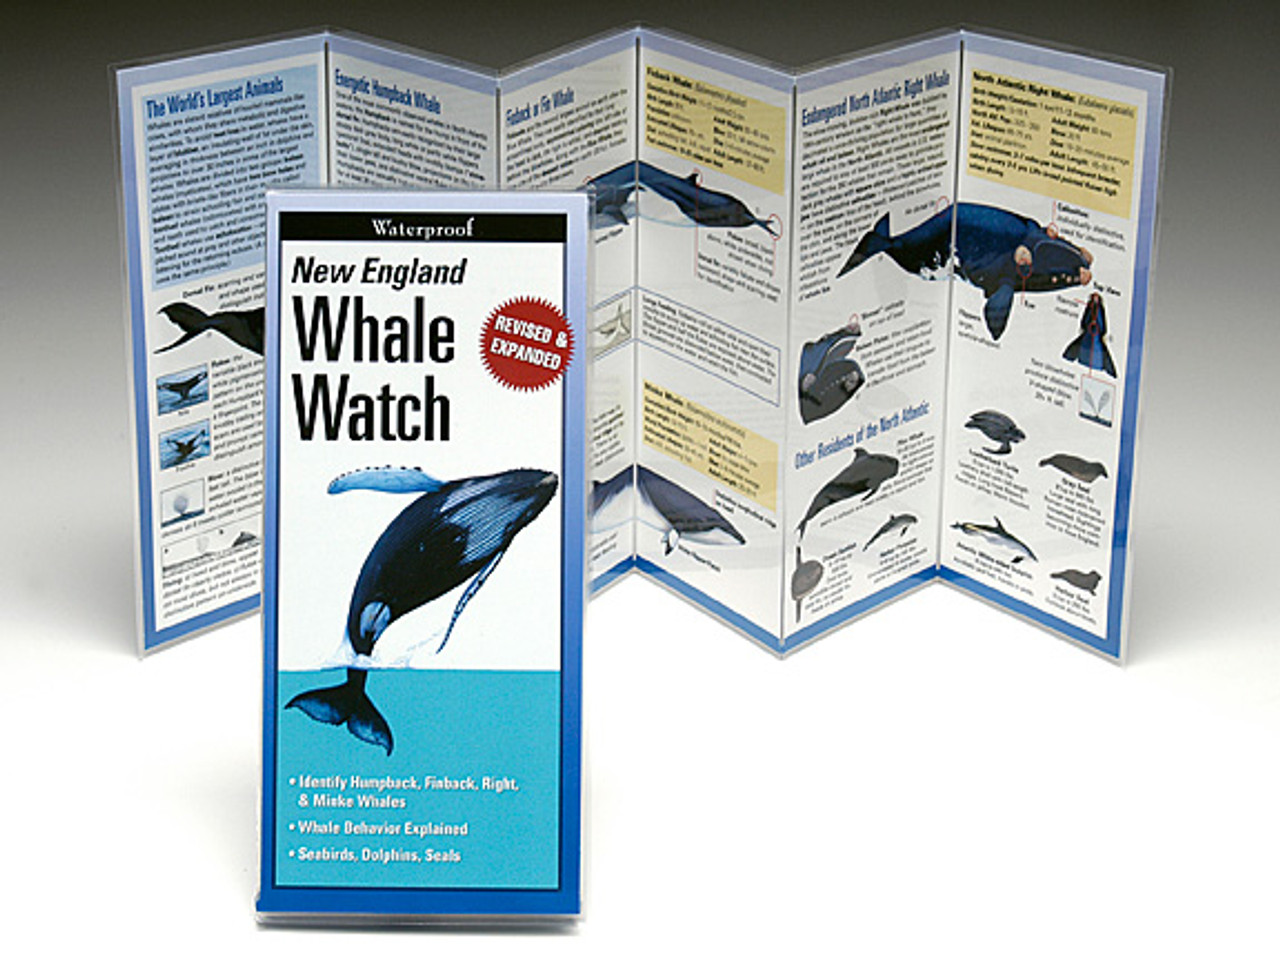 Whale Watch Guide of New England